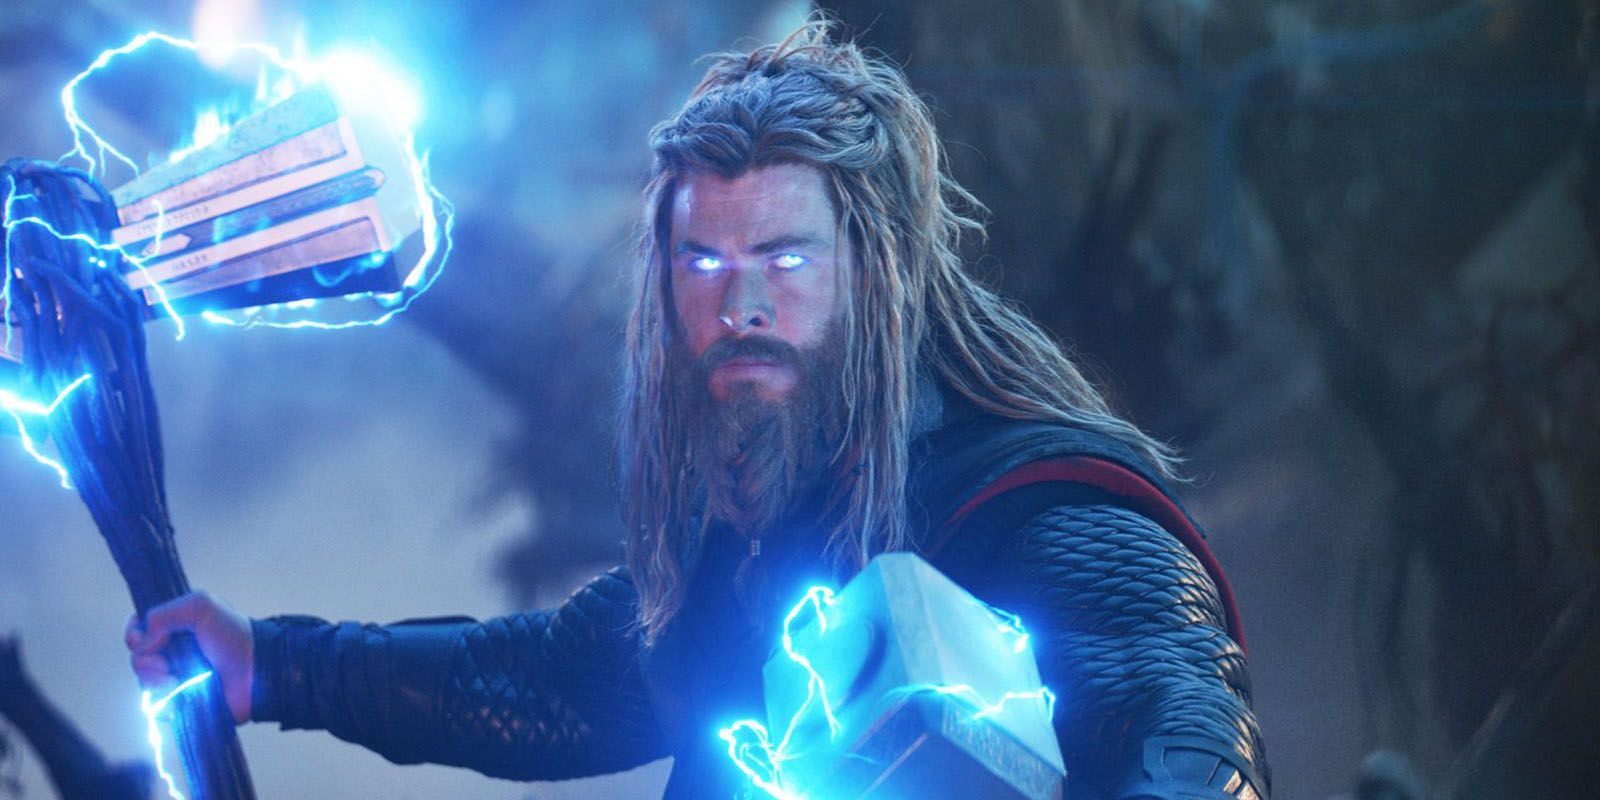 thor holding his weapons in the avengers endgame